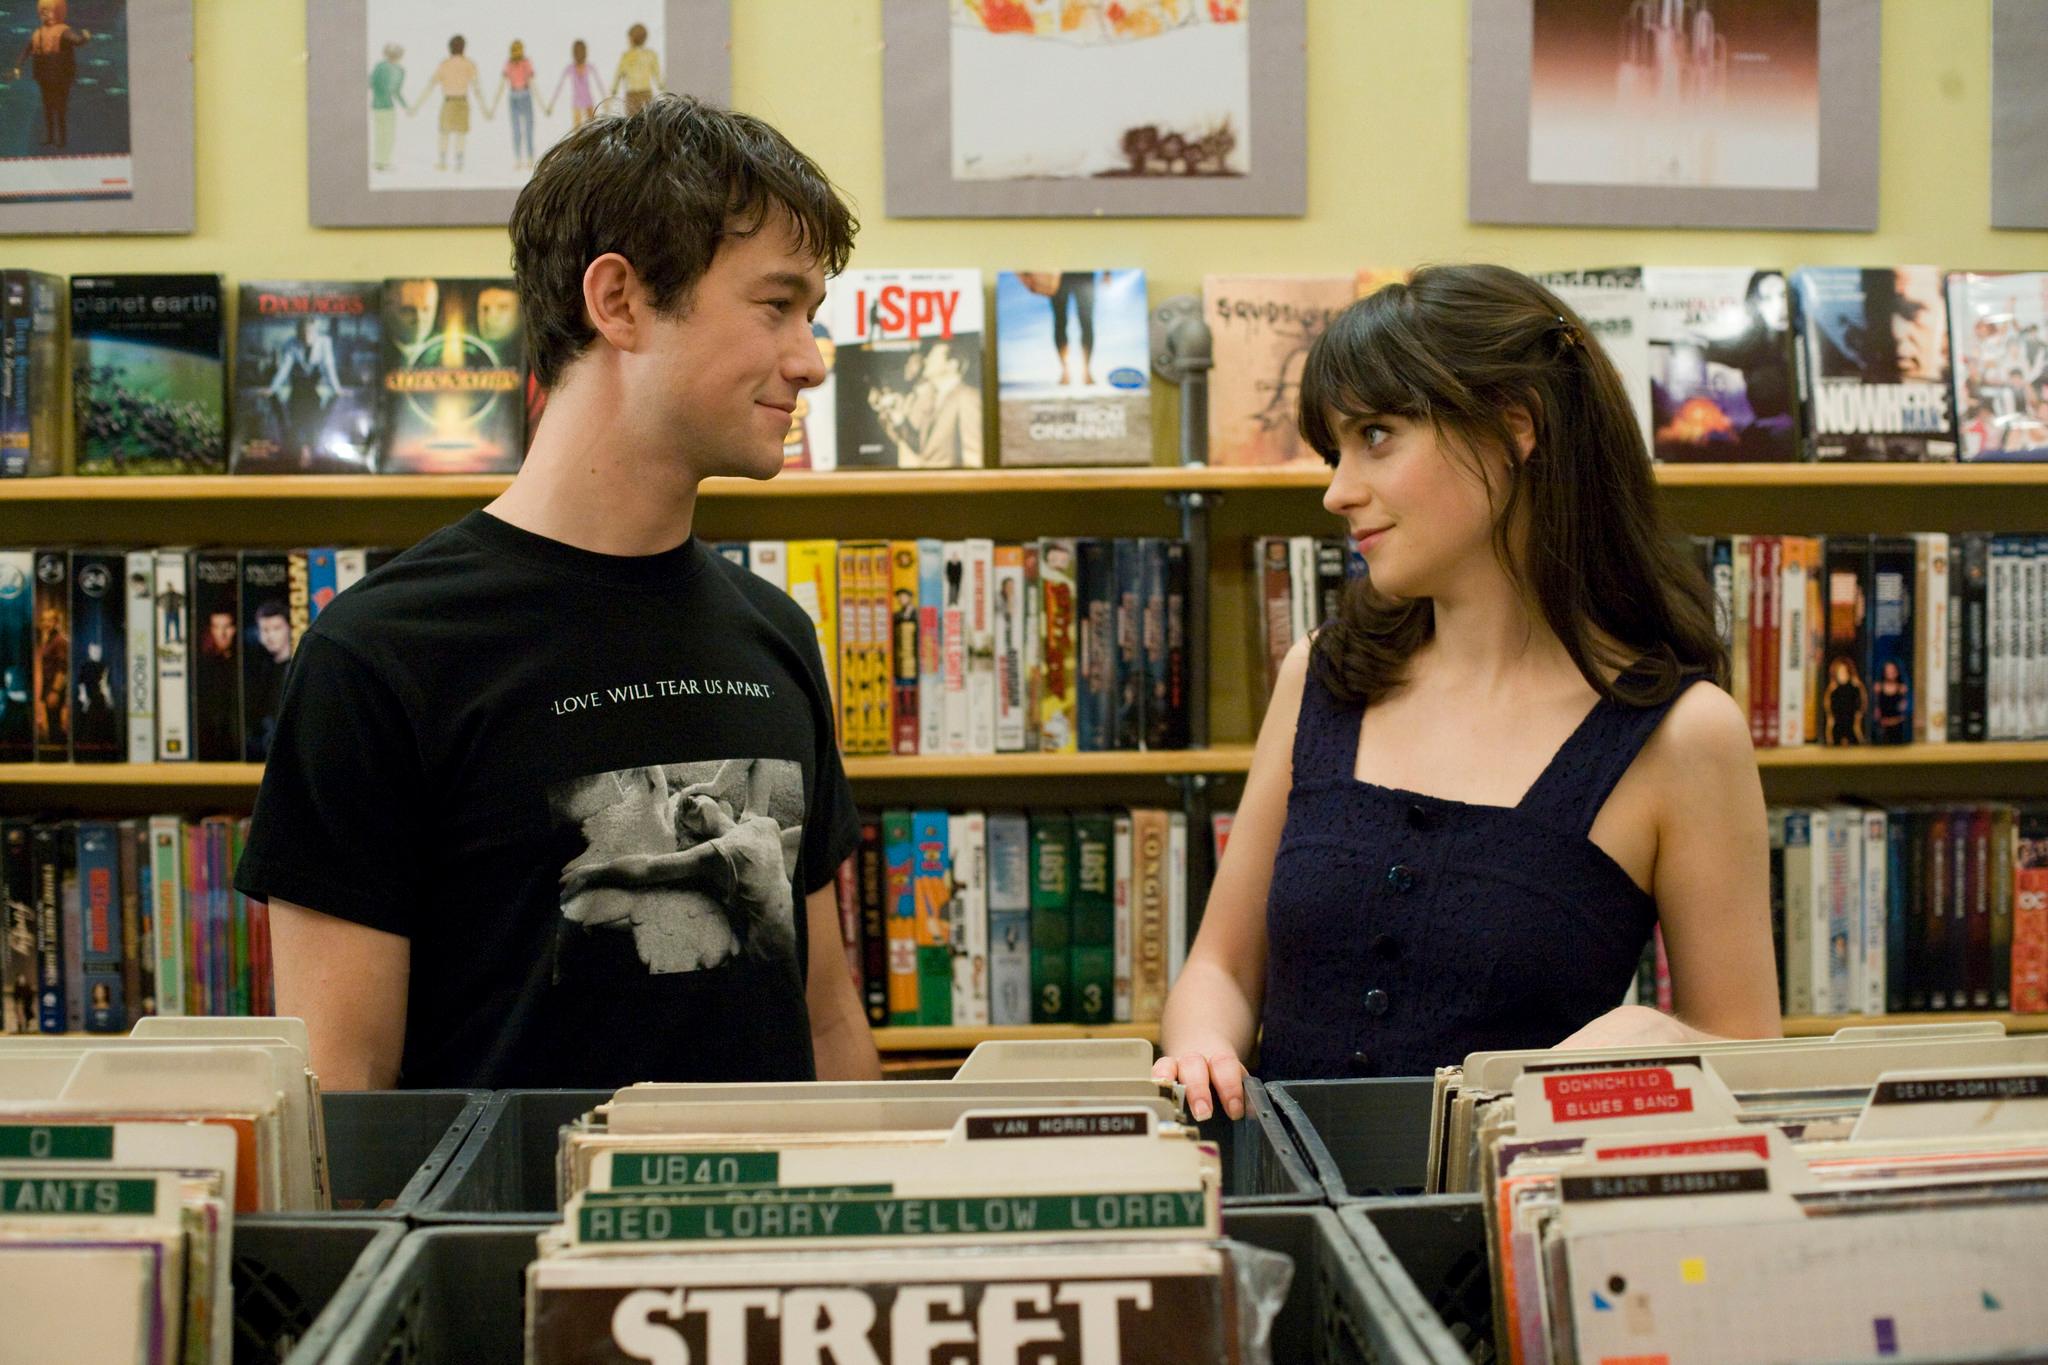 Joseph Gordon-Levitt stars as Tom Hansen, a hopeless romantic who navigates the aftermath of a breakup with Zooey Deschanel's character, Summer. The film, with its charming tragicomedy, is a perfect choice for a cozy Valentine's Day spent on the couch.